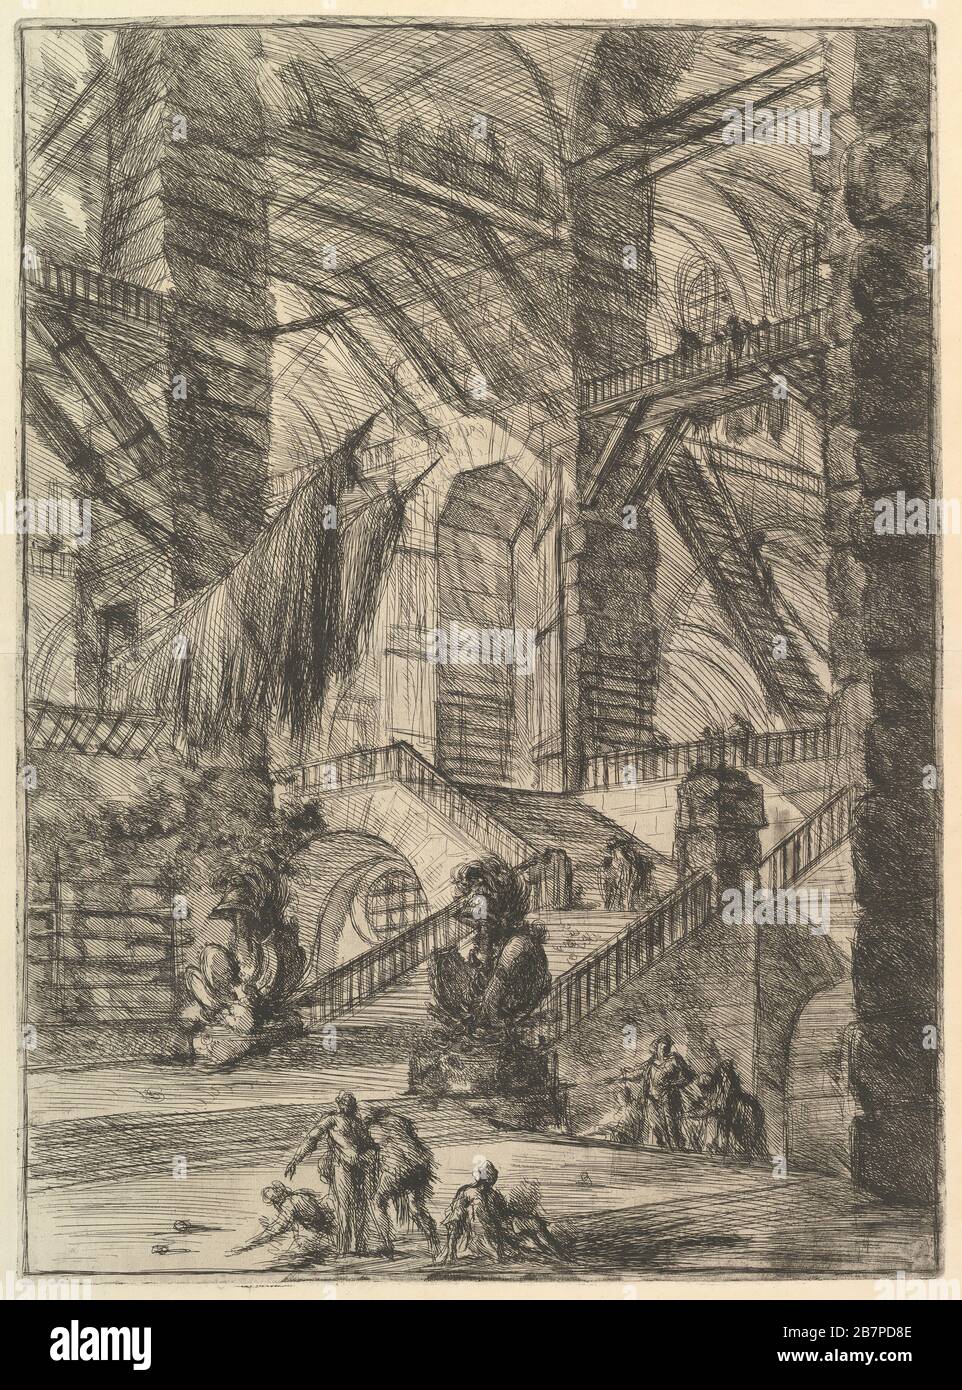 The Staircase with Trophies, from Carceri d'invenzione (Imaginary Prisons), ca. 1749-50. Stock Photo